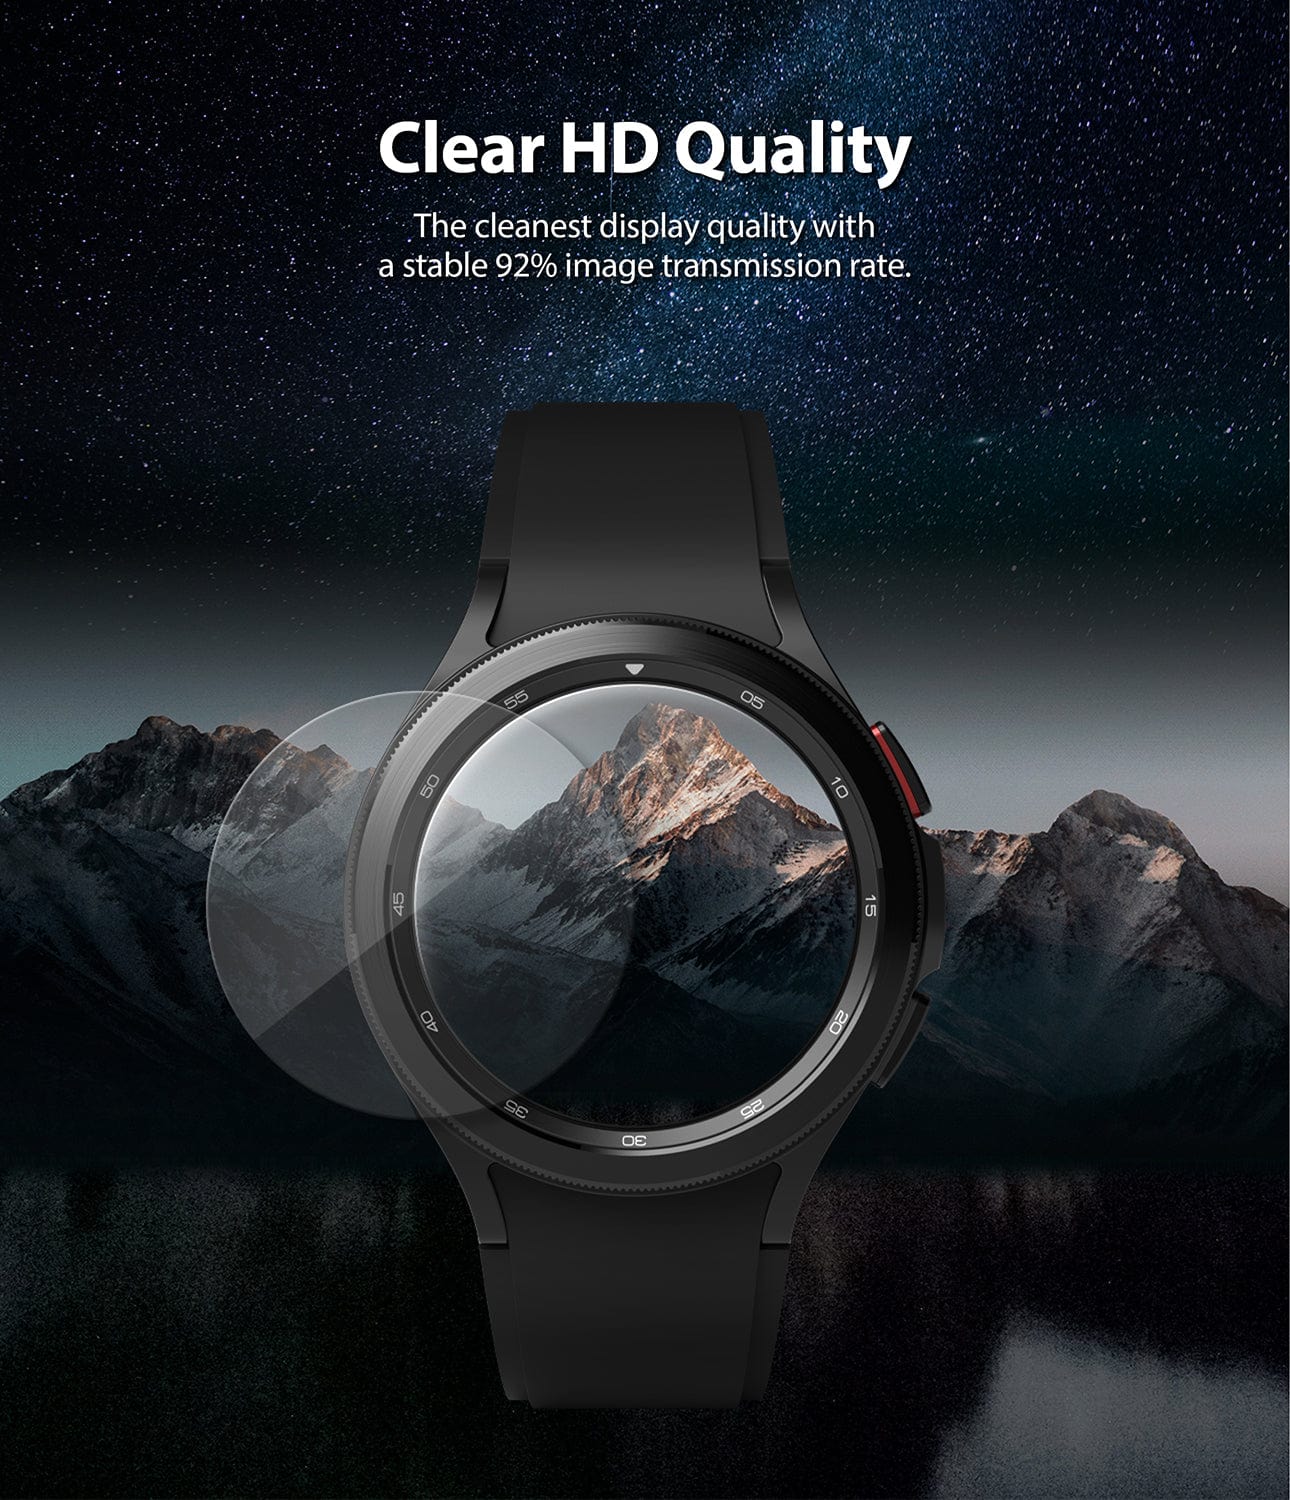 Galaxy Watch 4 Classic 46mm ID Glass Screen Protector By Ringke